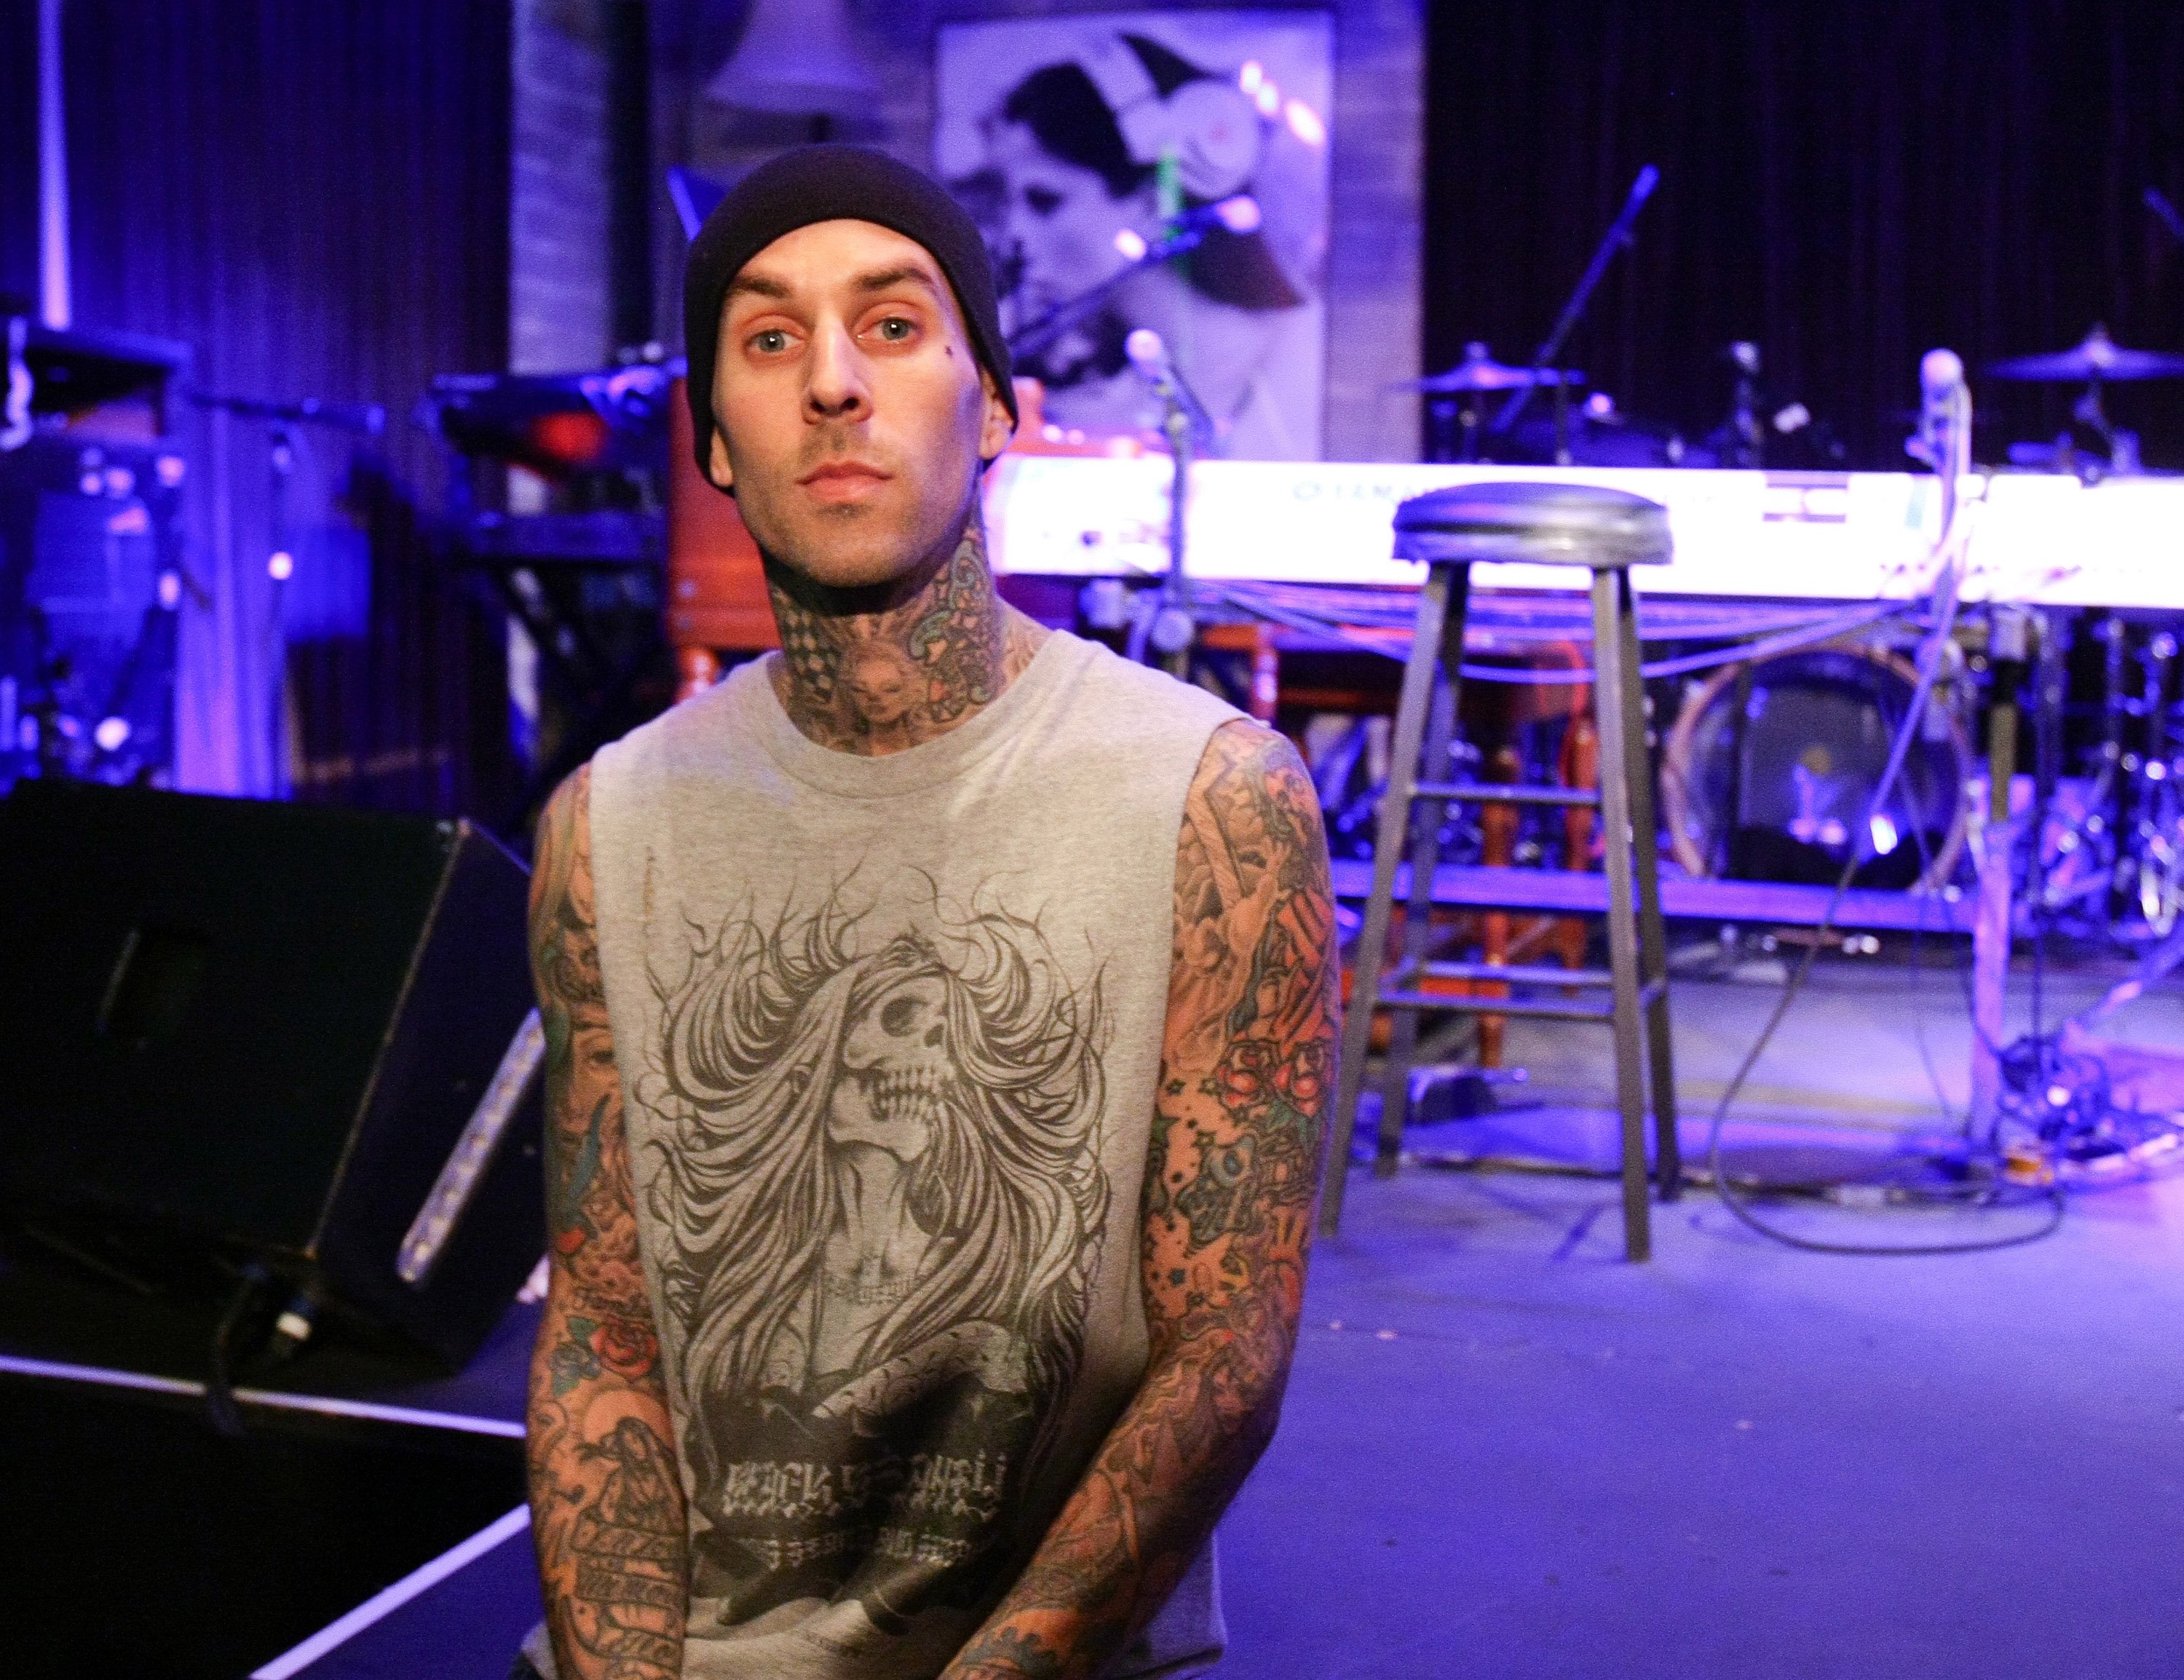 Travis Barker attends his "Give The Drummer Some" press day at Tom Tom Club